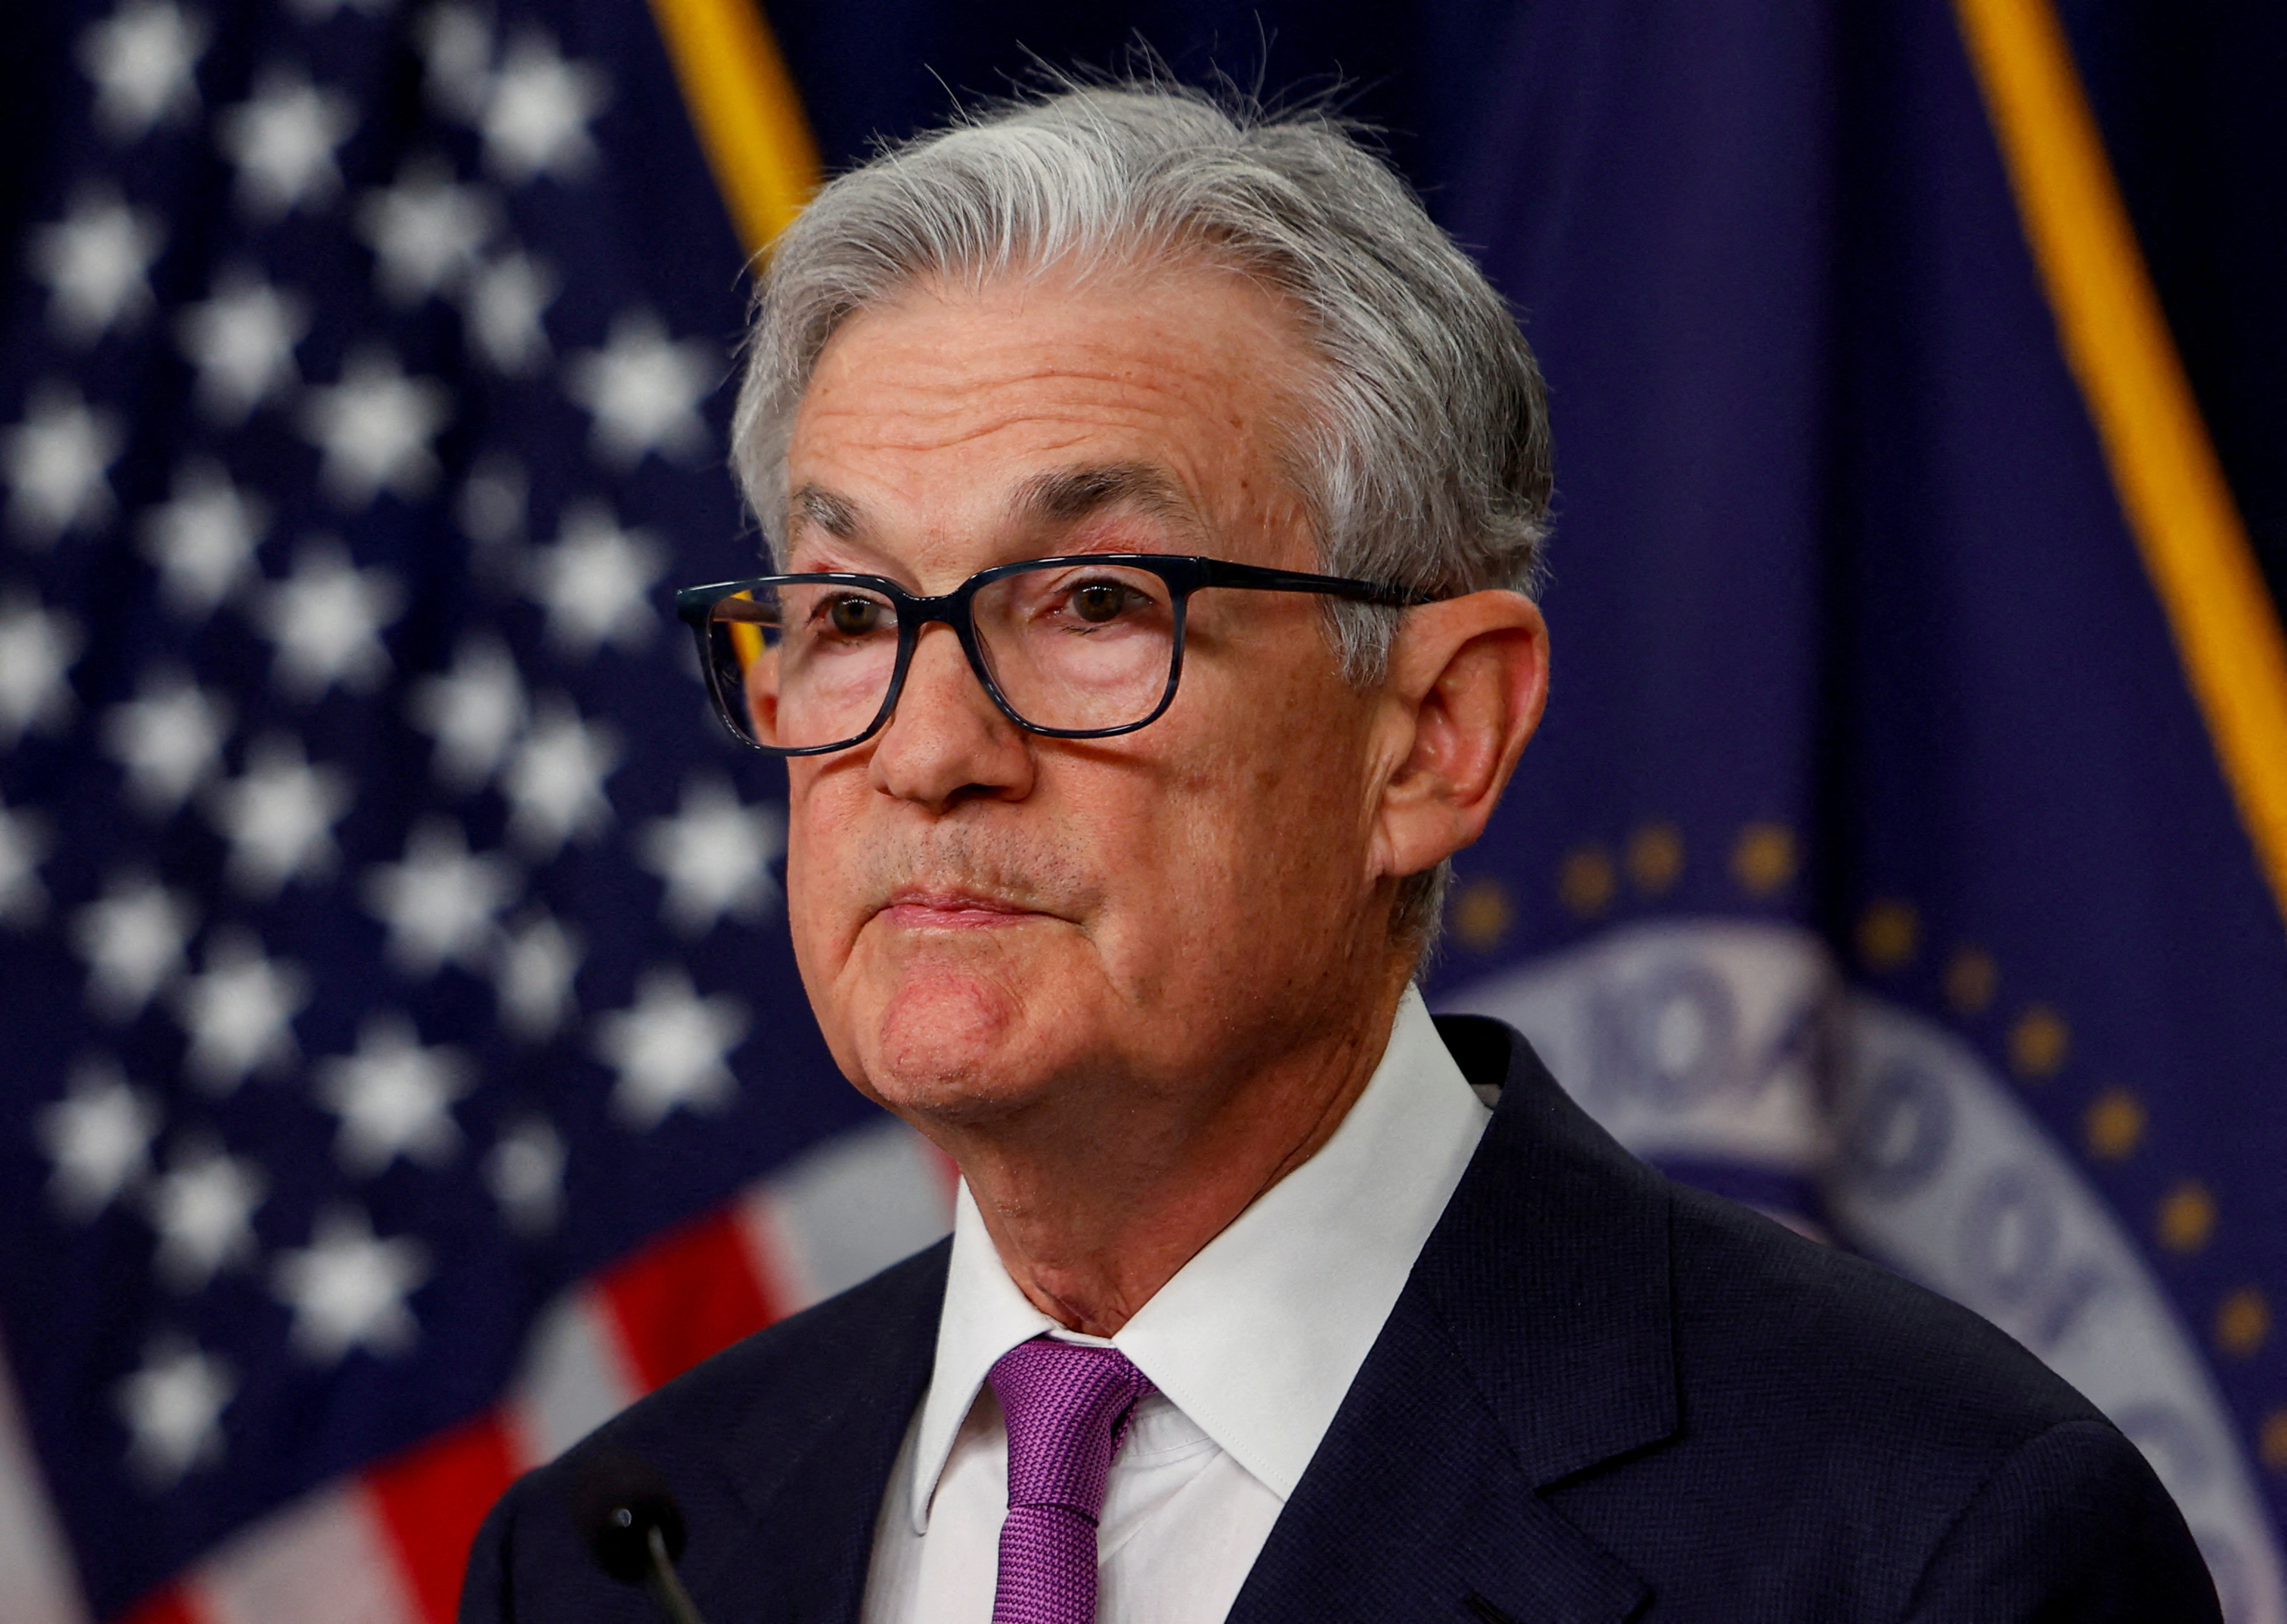 Fed Chair Powell speaks during news conference in Washington